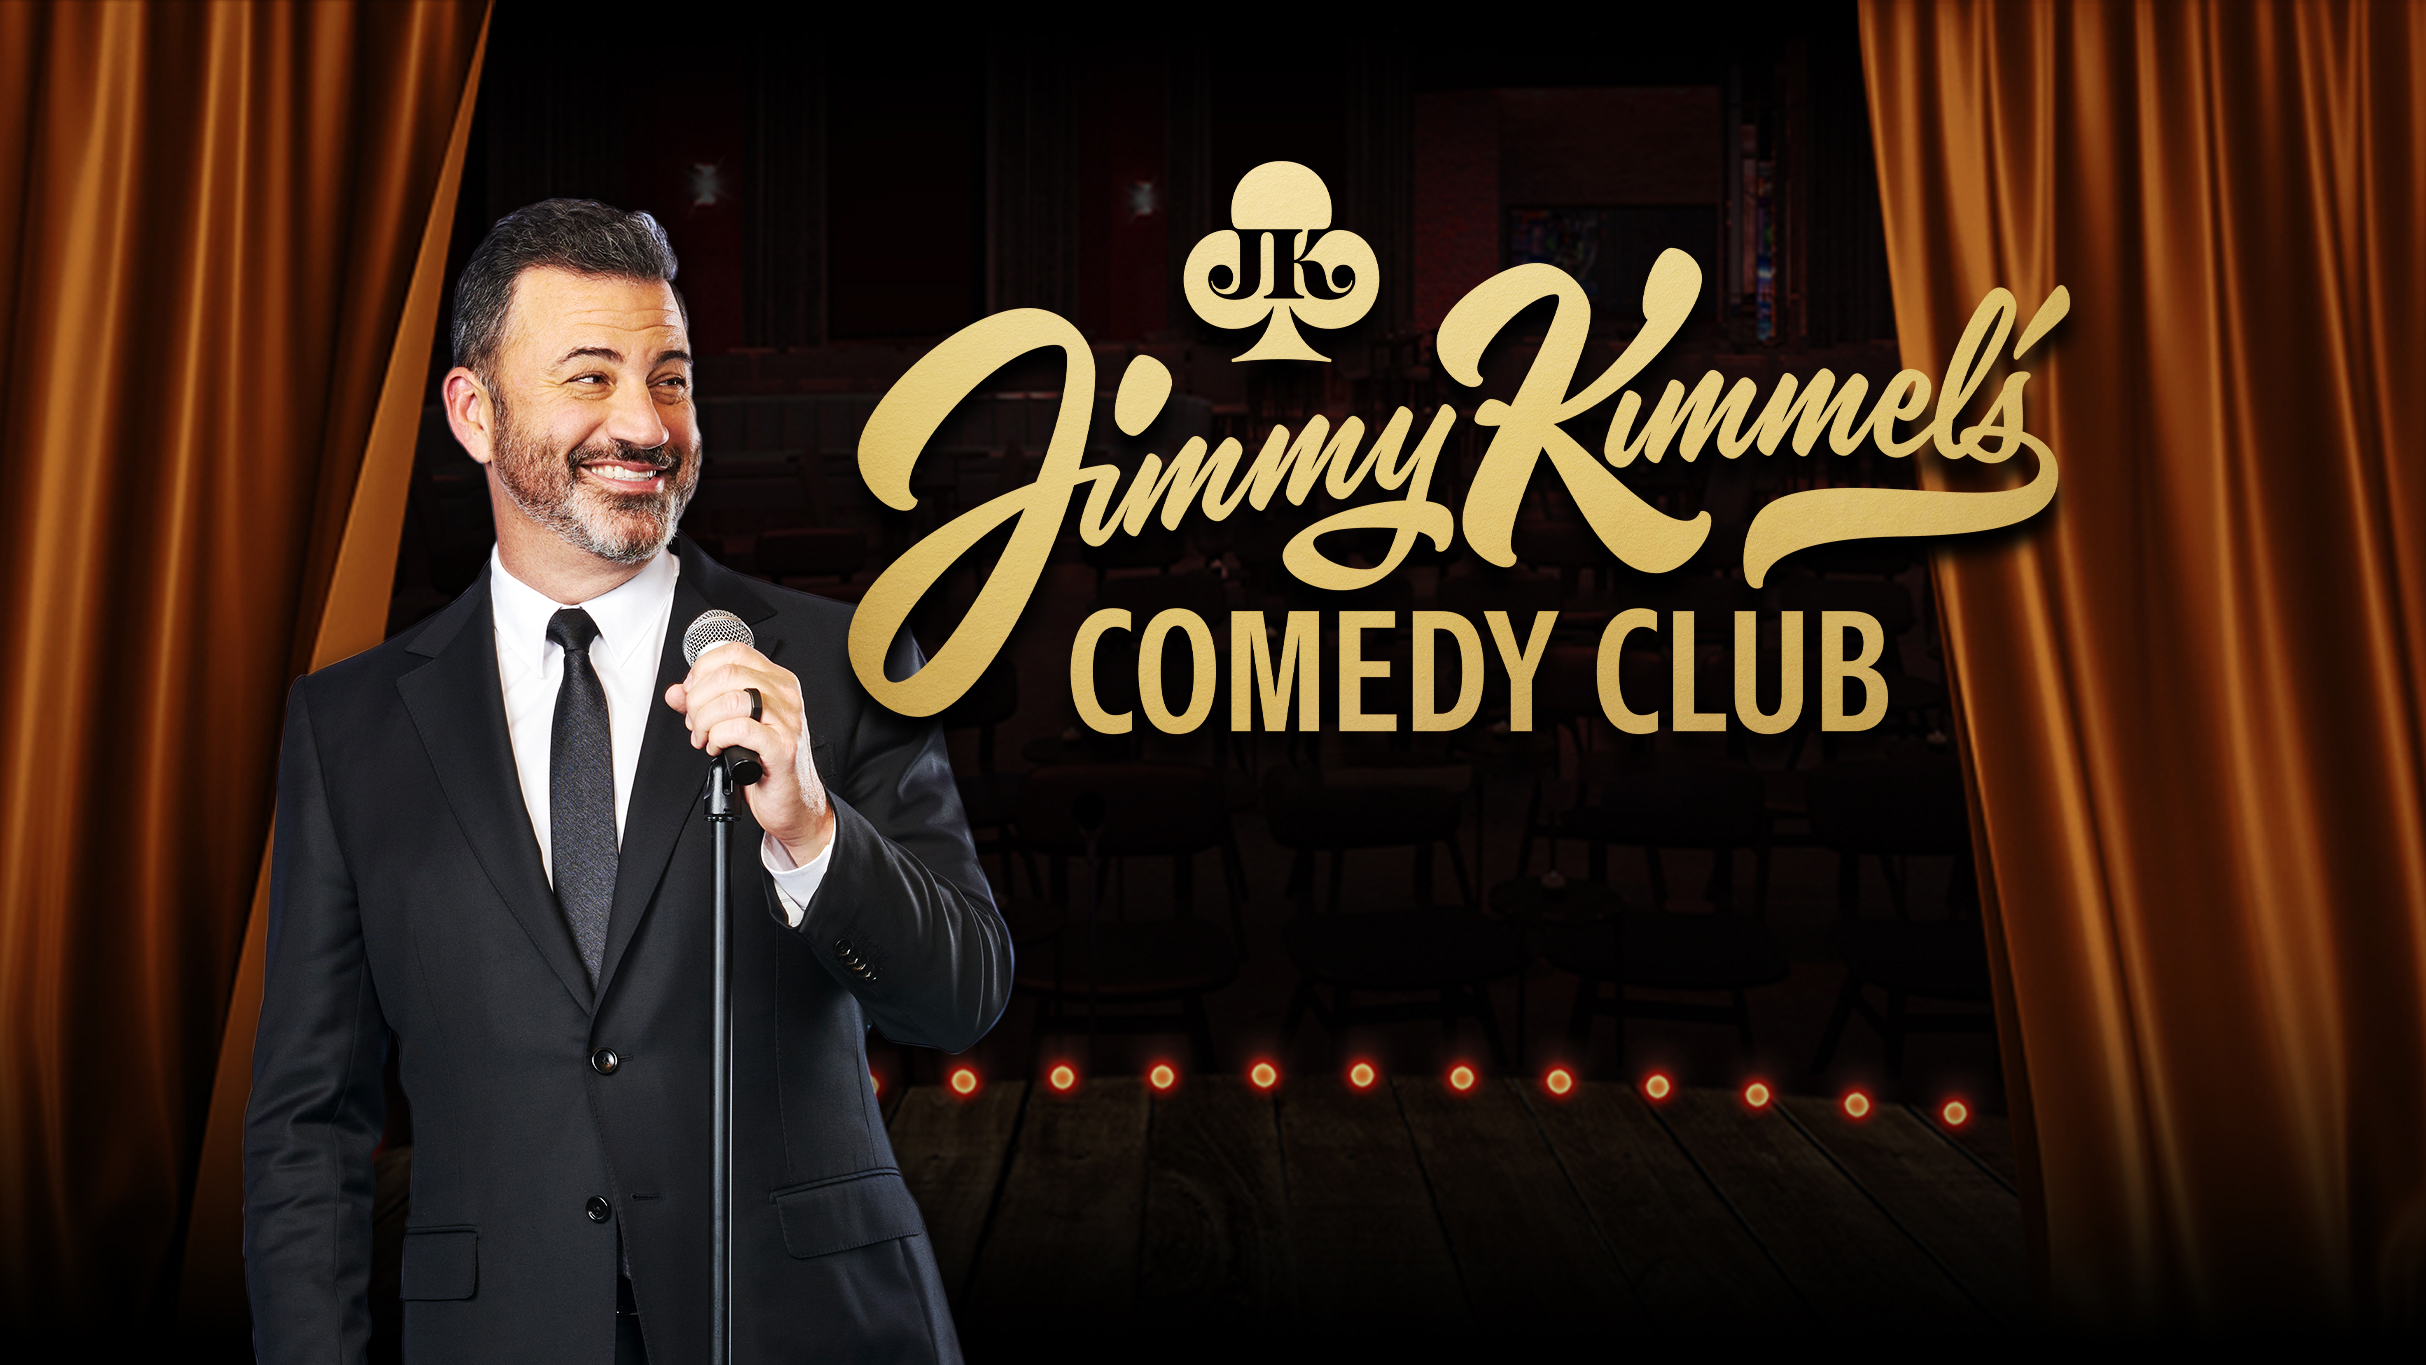 Comedy Embraced At Jimmy Kimmel's Comedy Club